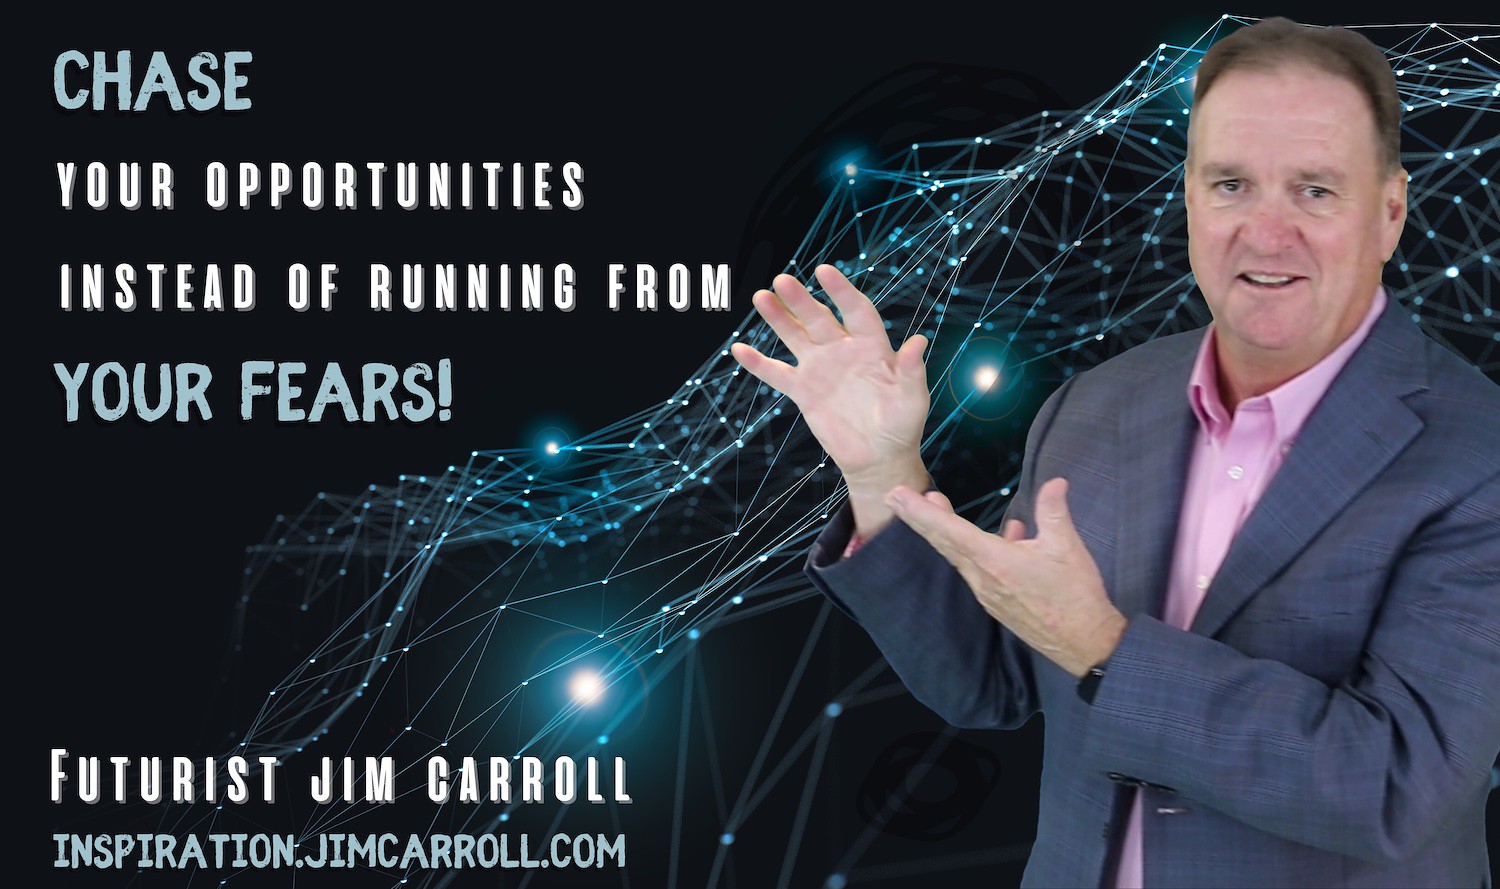 "Chase your opportunities, instead of running from your fears!" - Futurist Jim Carroll